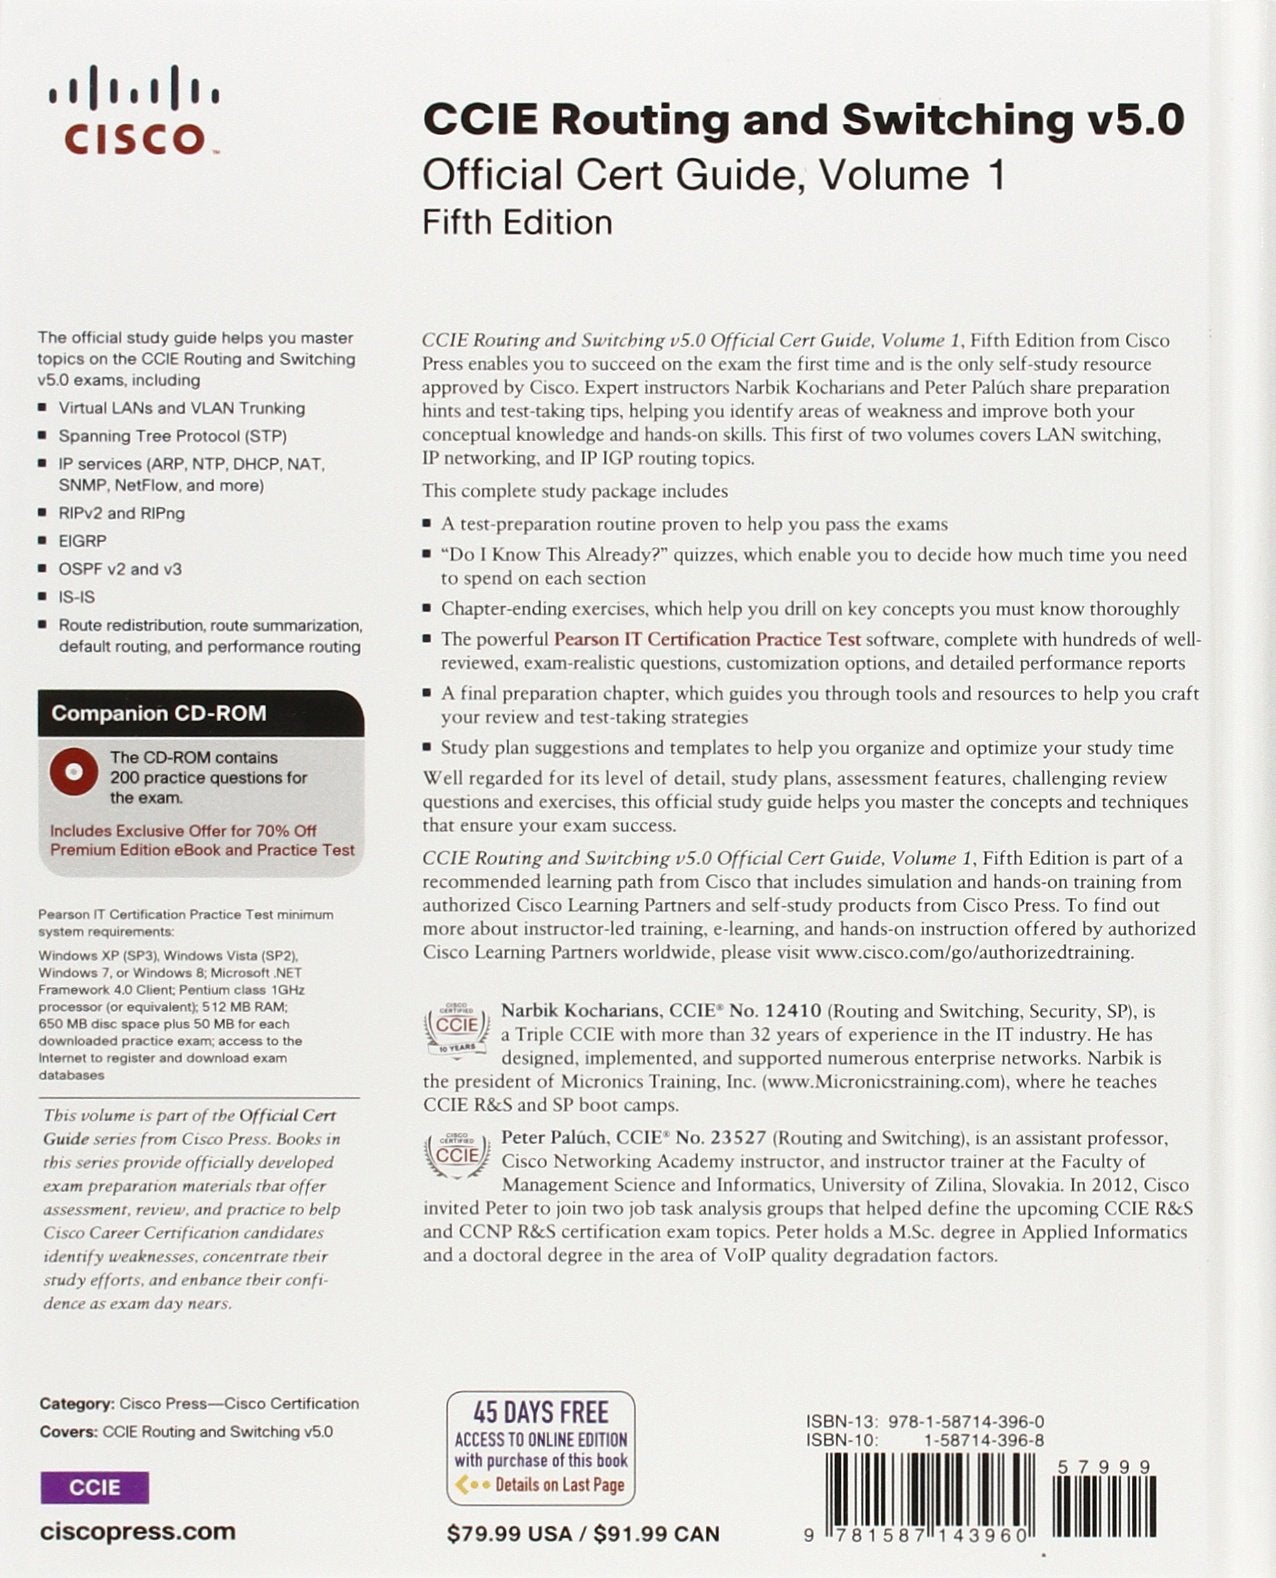 BOOK - CCIE ROUTING AND SWITCHING V5.0 OFFICIAL CERT GUIDE, VOL 1